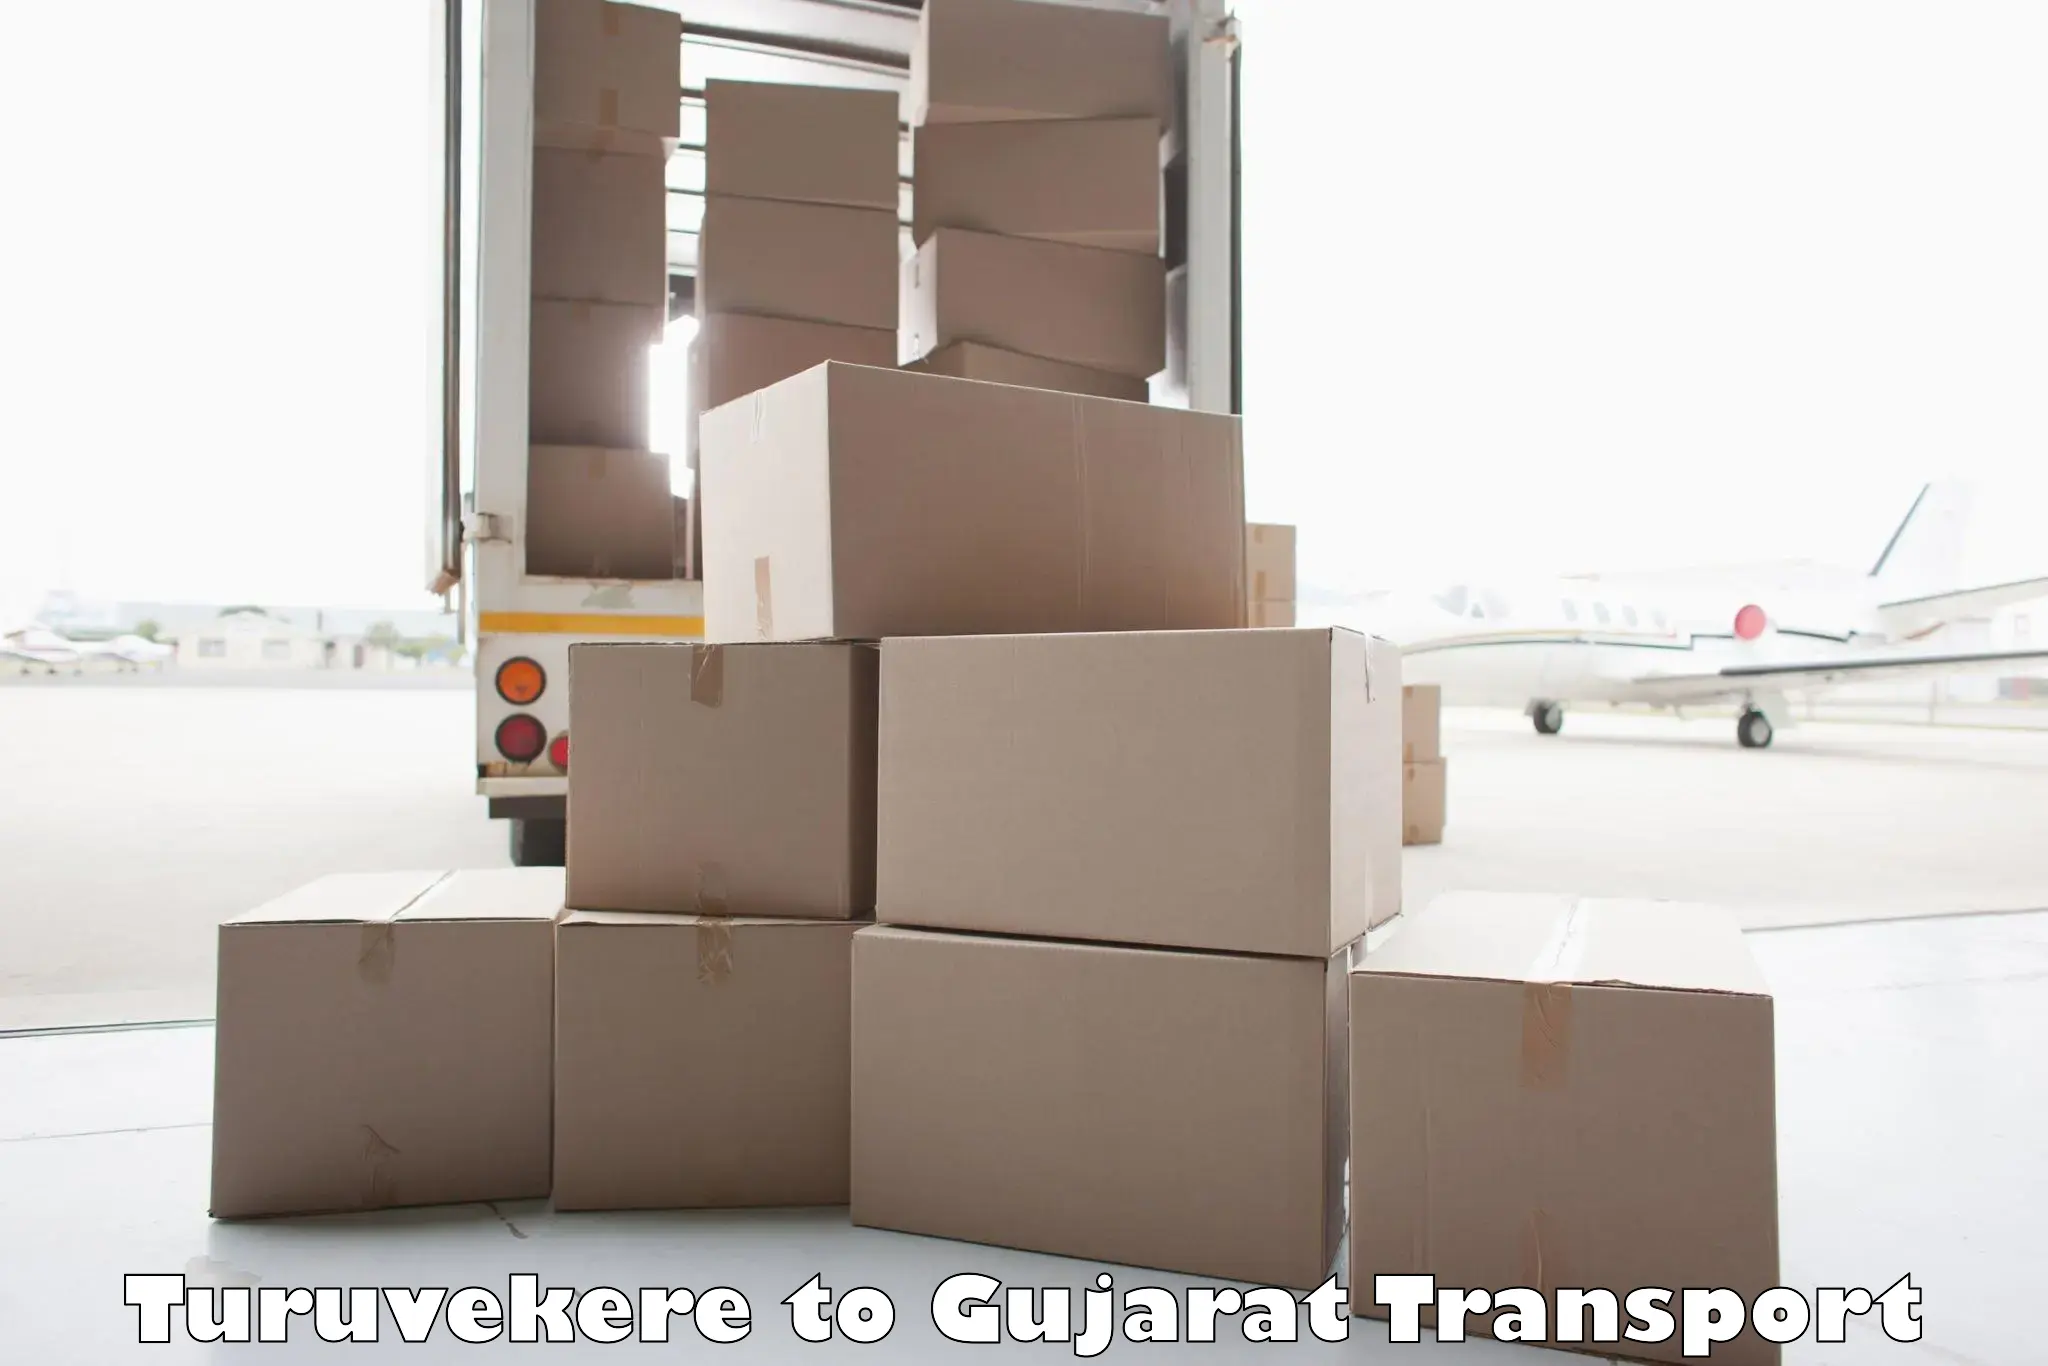 Container transport service Turuvekere to Rapar